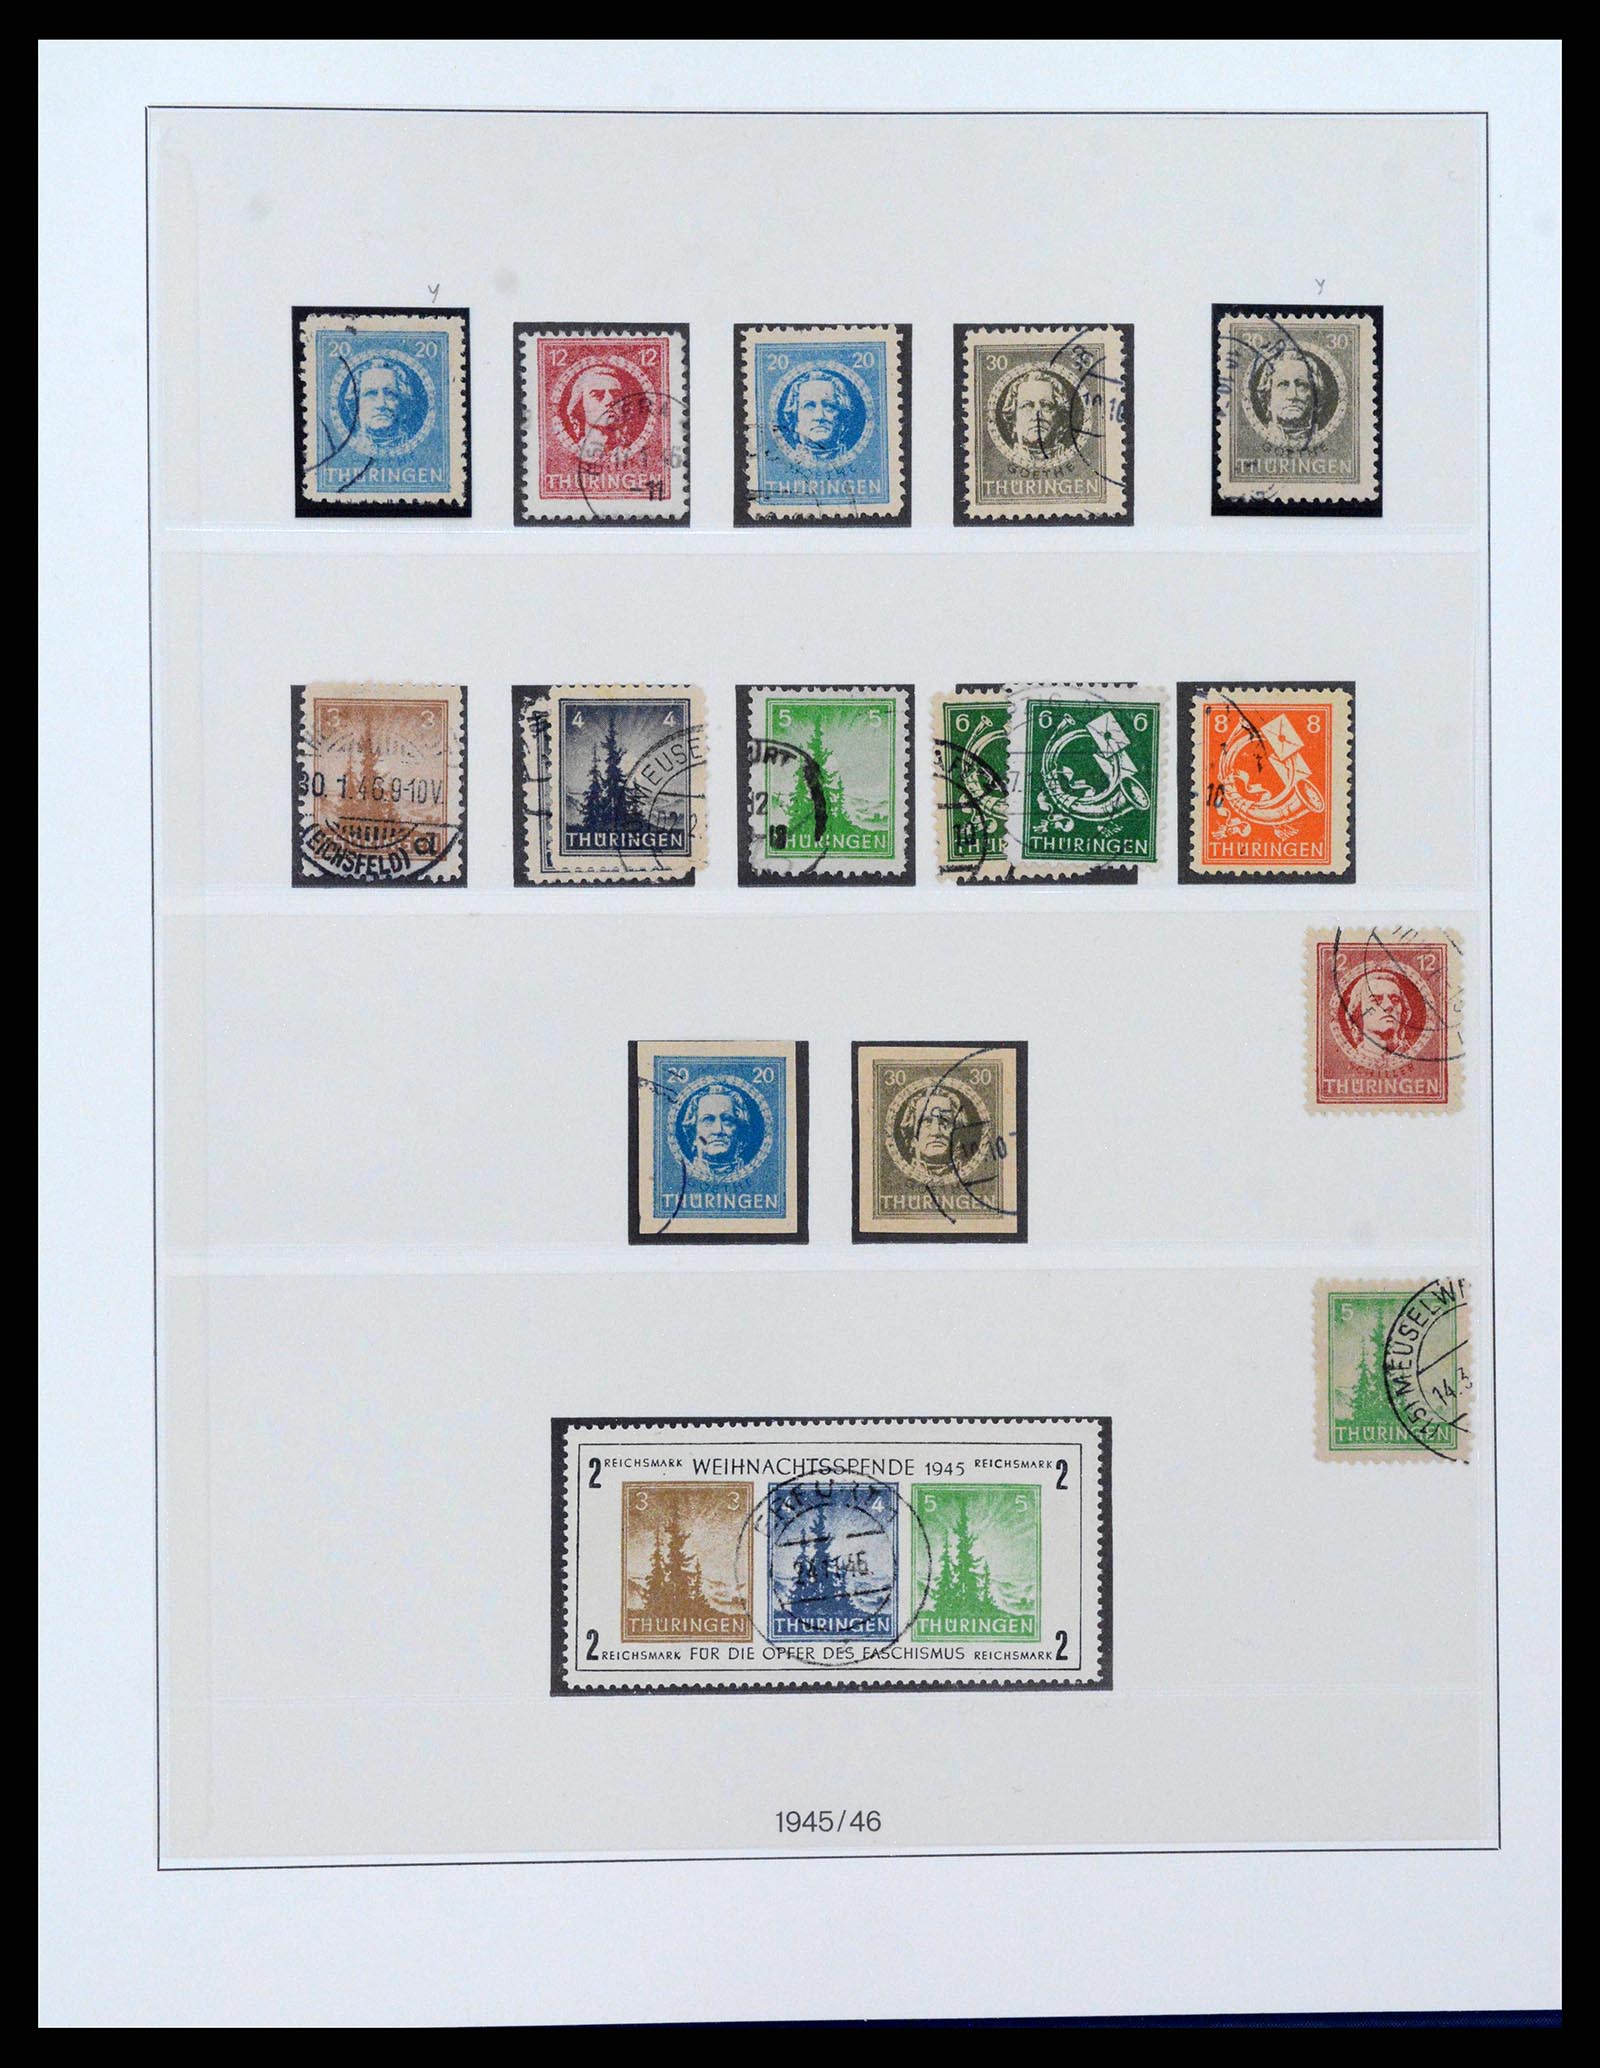 38890 0020 - Stamp collection 38890 Germany sovjet zone 1945-1949.